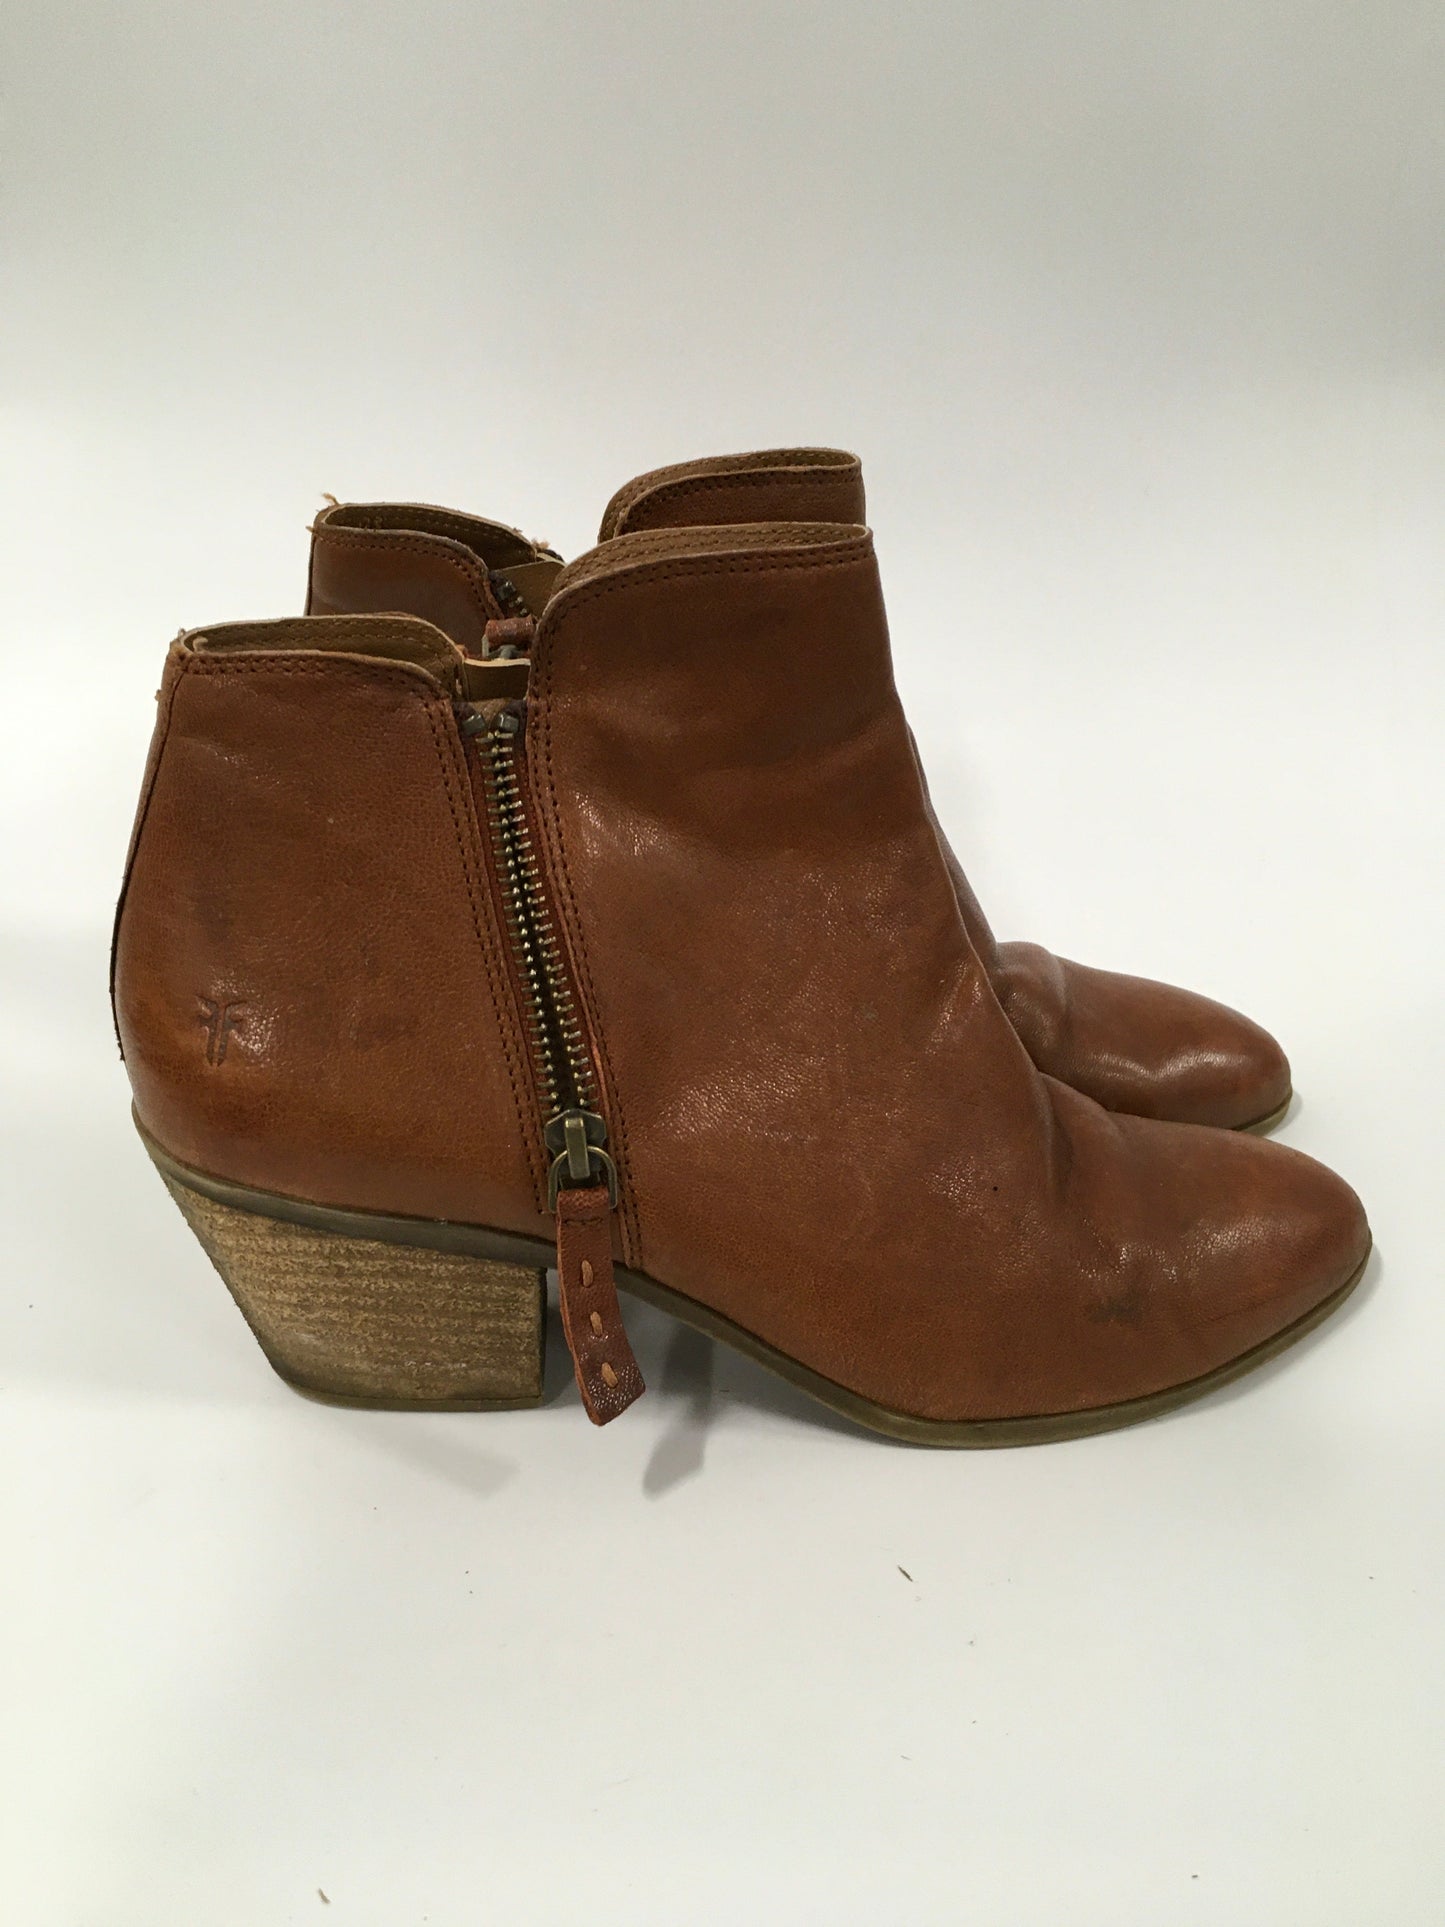 Brown Boots Ankle Heels Frye, Size 8.5